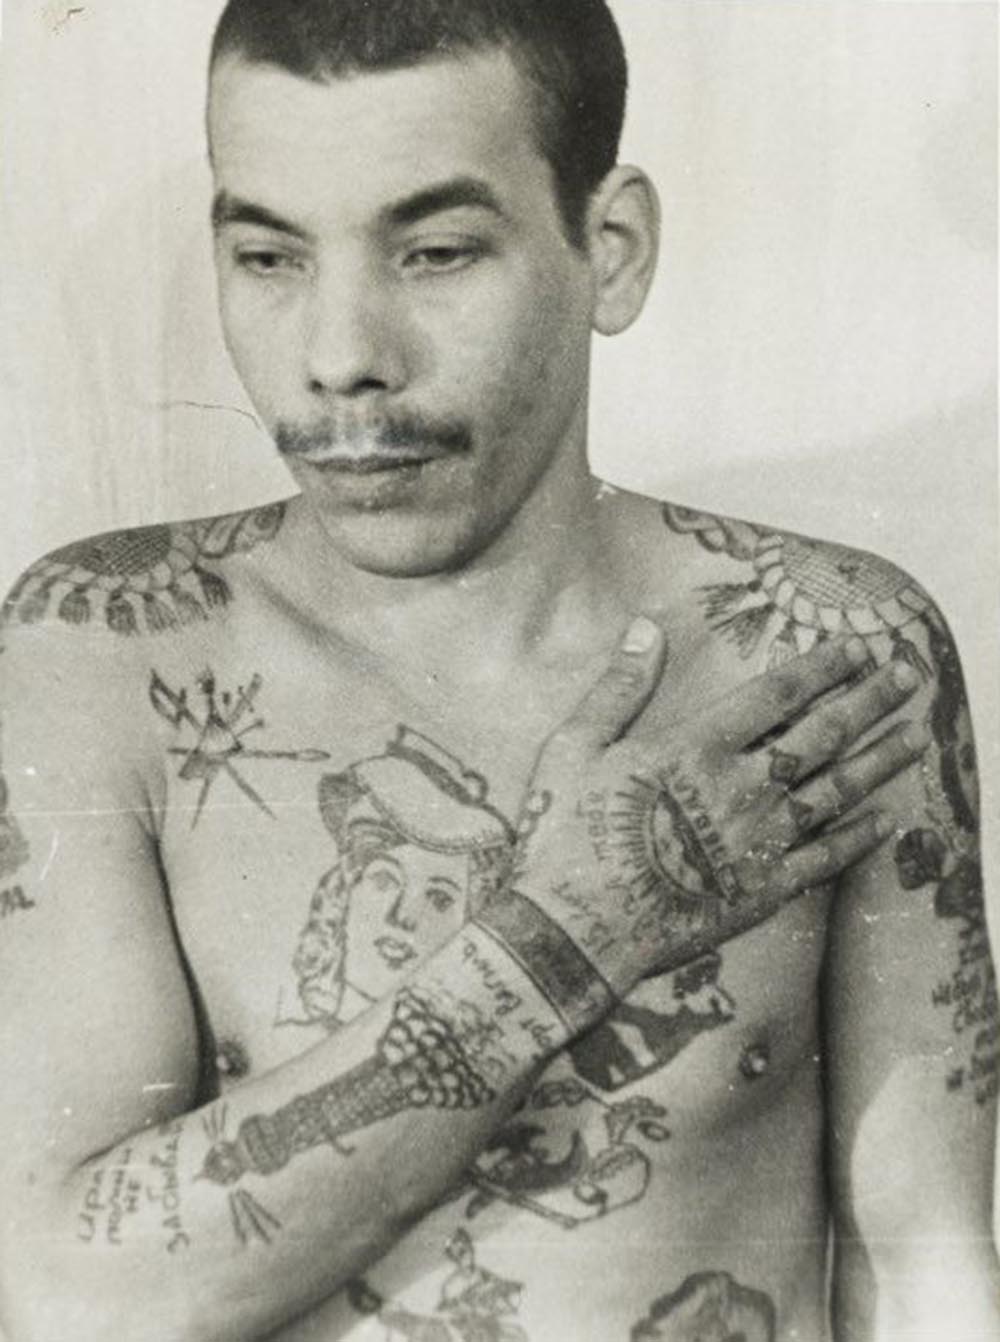 This man is a Muslim; his features also indicate he is not Russian. Text on the arm reads 'Remember me, don't forget me' and 'I waited 15 years for you.' On his stomach (left) is a religious building with a crescent moon. He is not an authoritative thief, but has tried to imitate them with his tattoos to increase his standing within the prison. The lighthouse on his right arm denotes a pursuit of freedom. Each wrist manacle indicates a sentence of more than five years in prison.